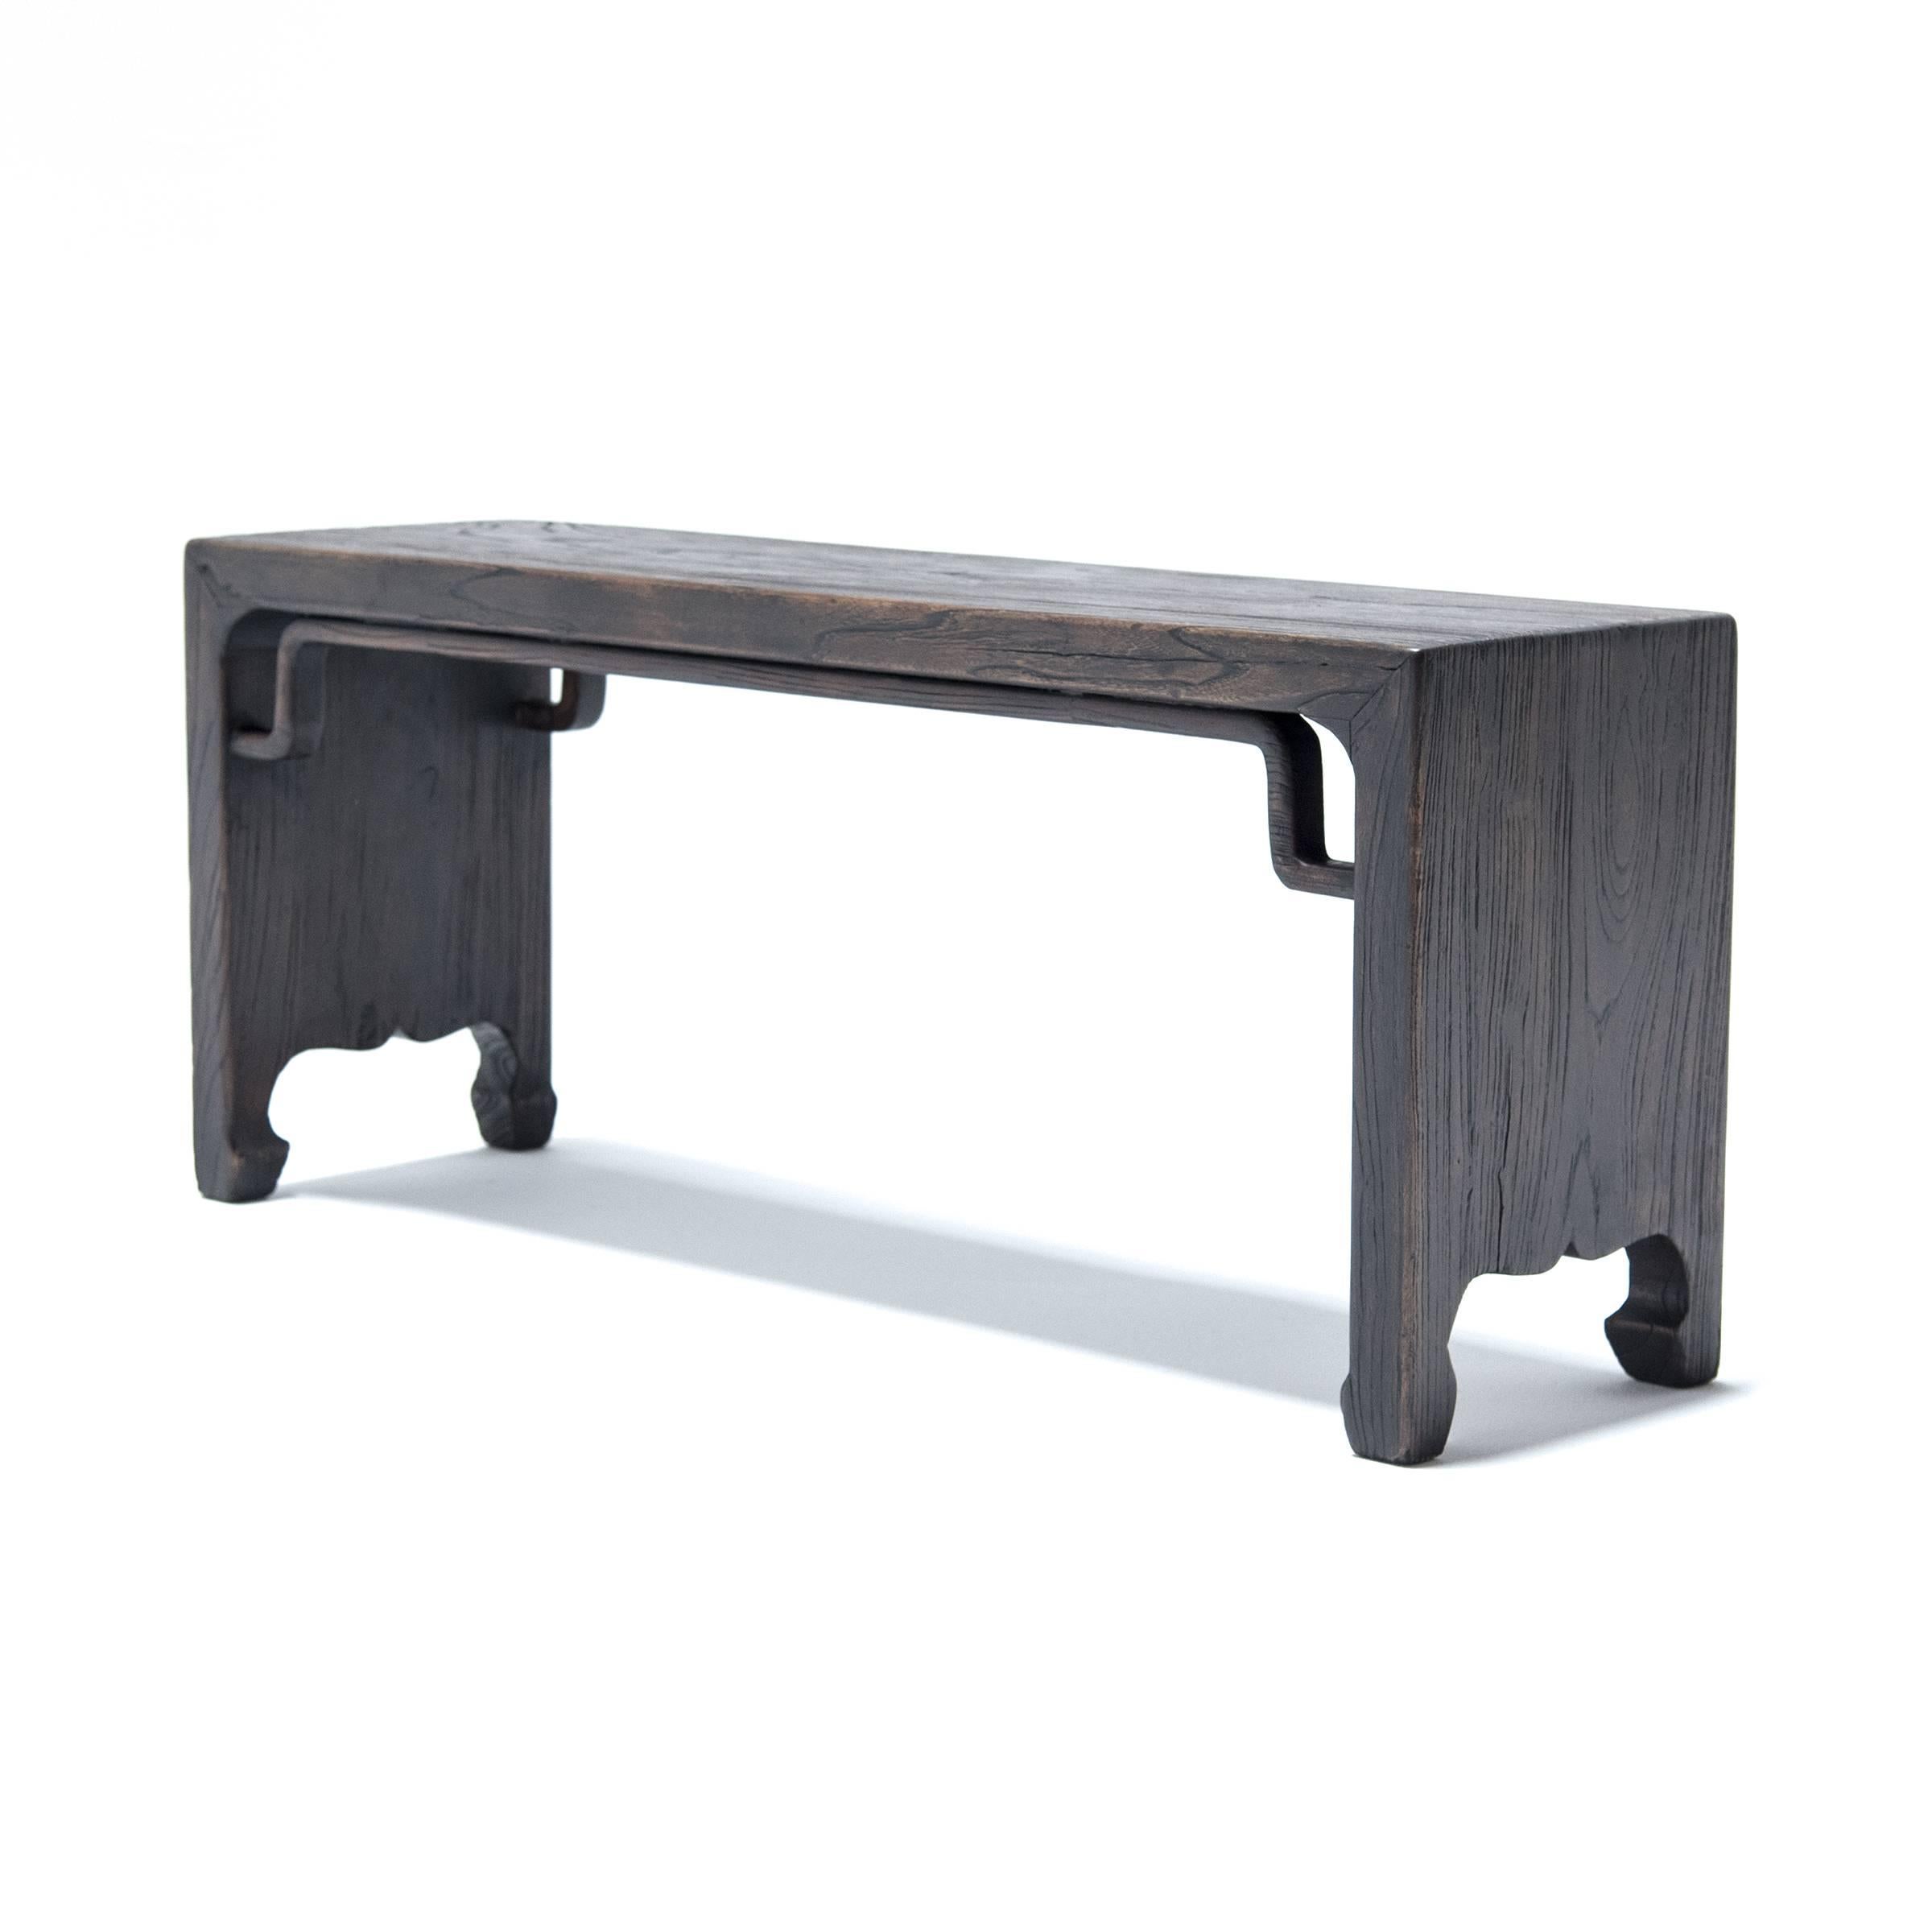 This waterfall bench with mitered corners is made from elm wood reclaimed from 18th century Northern Chinese buildings. It is a modern interpretation of traditional Ming form. The solid planks are finished on each side with carved, hoofed feet. The